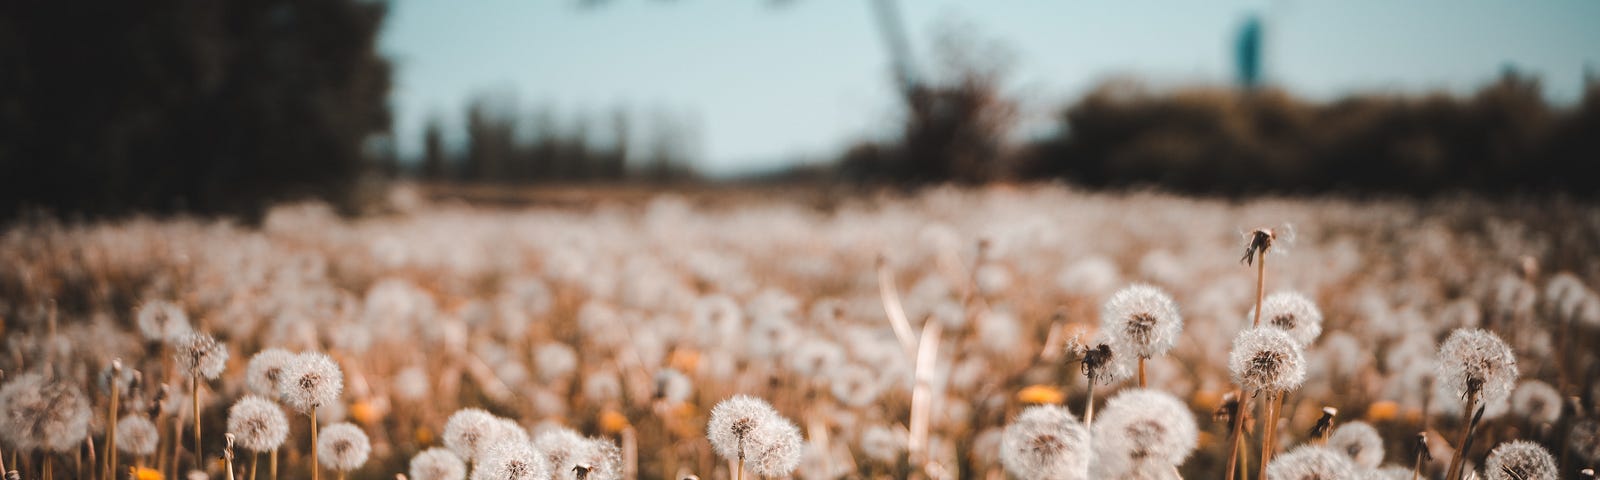 A field covered in dandelions in a rose-colored hue.